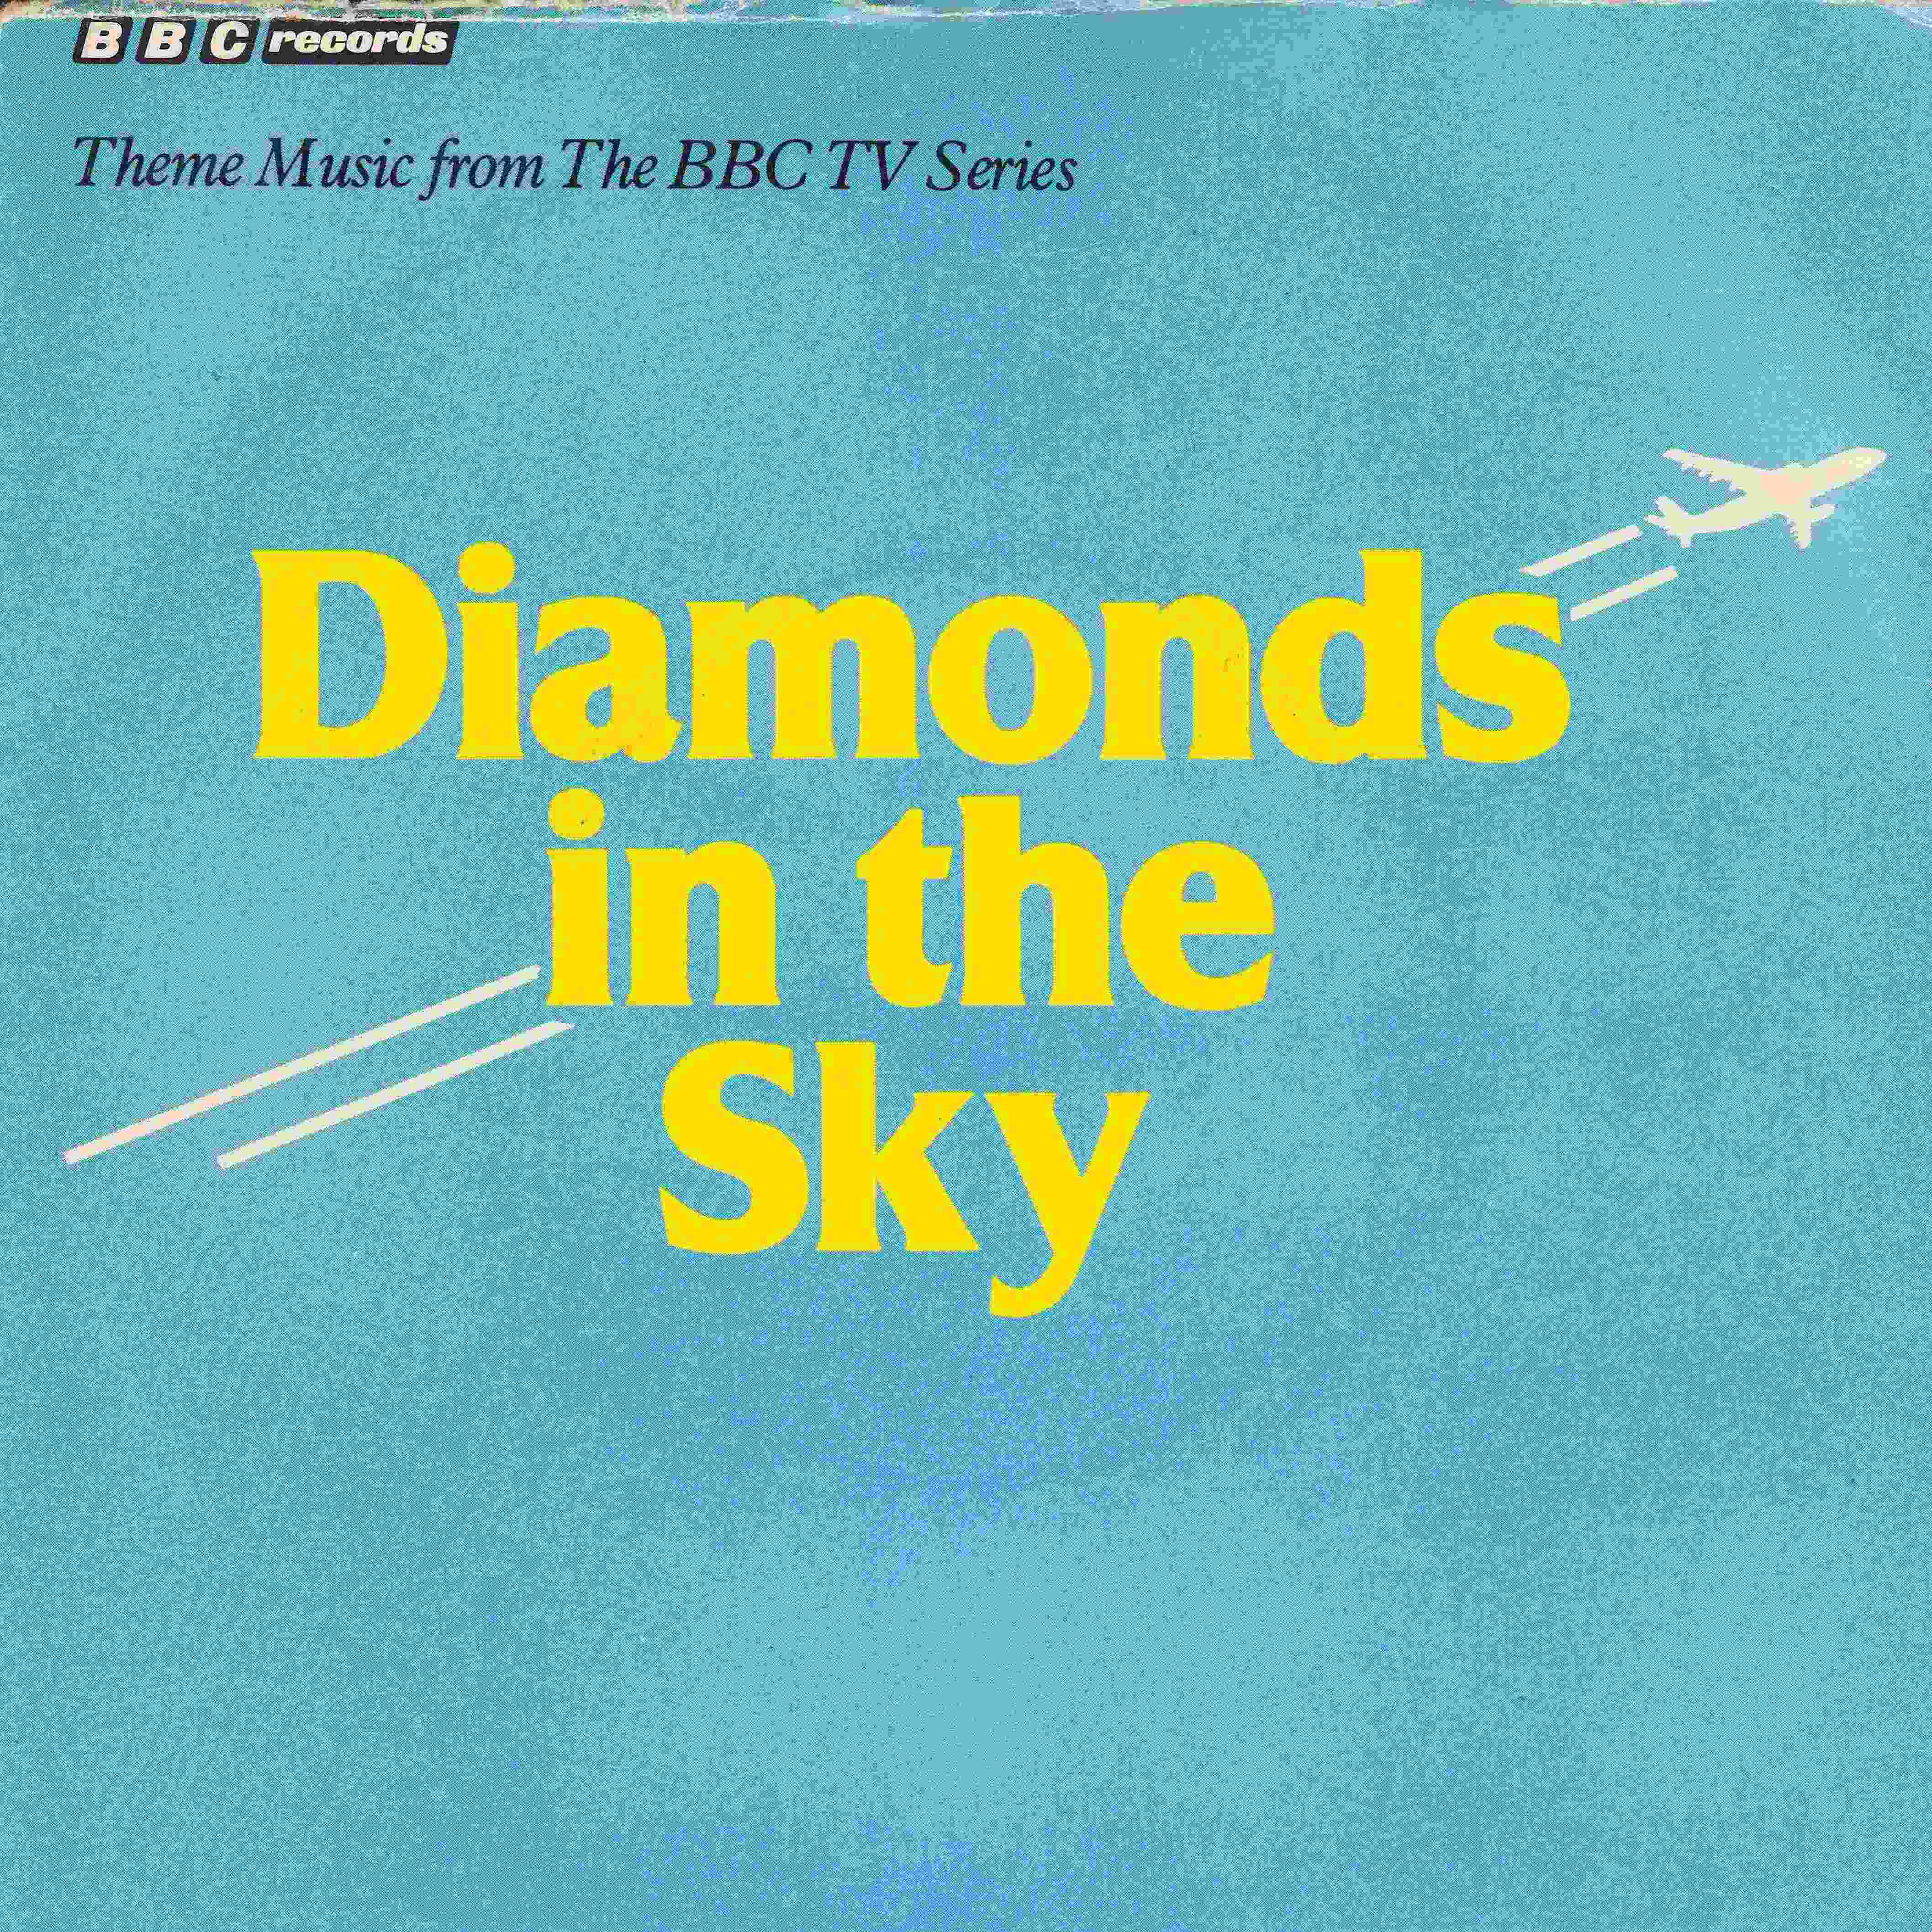 Picture of RESL 72 Diamonds in the sky by artist Richard Denton / Martin Cook from the BBC singles - Records and Tapes library